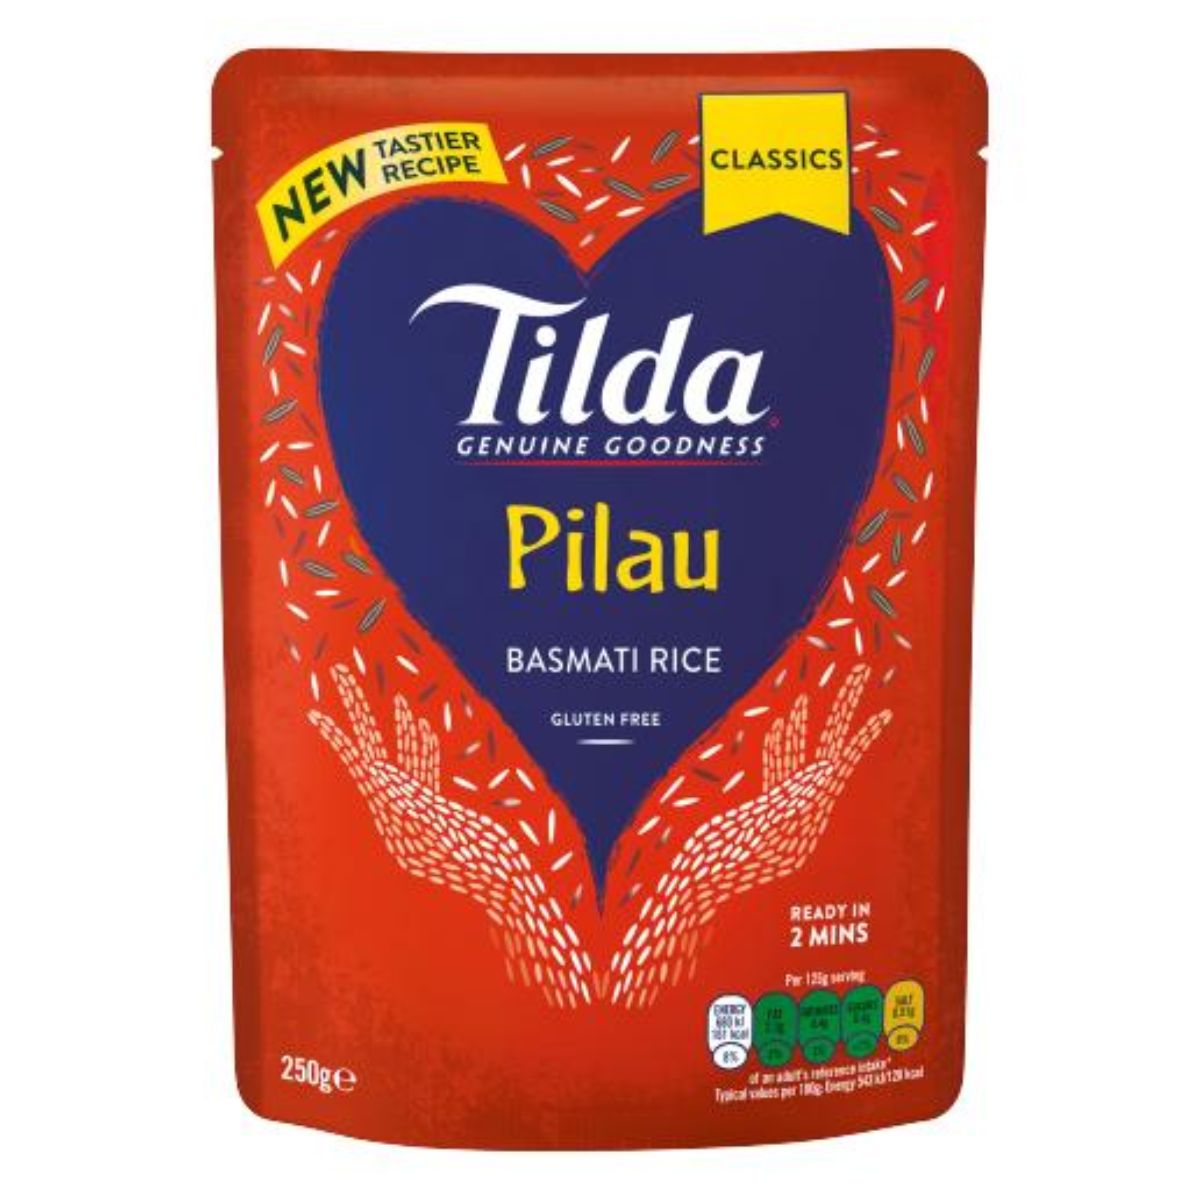 Packaging of Tilda - Microwave Pilau Basmati Rice - 250g, gluten-free, with a new tastier recipe, ready in 2 minutes.